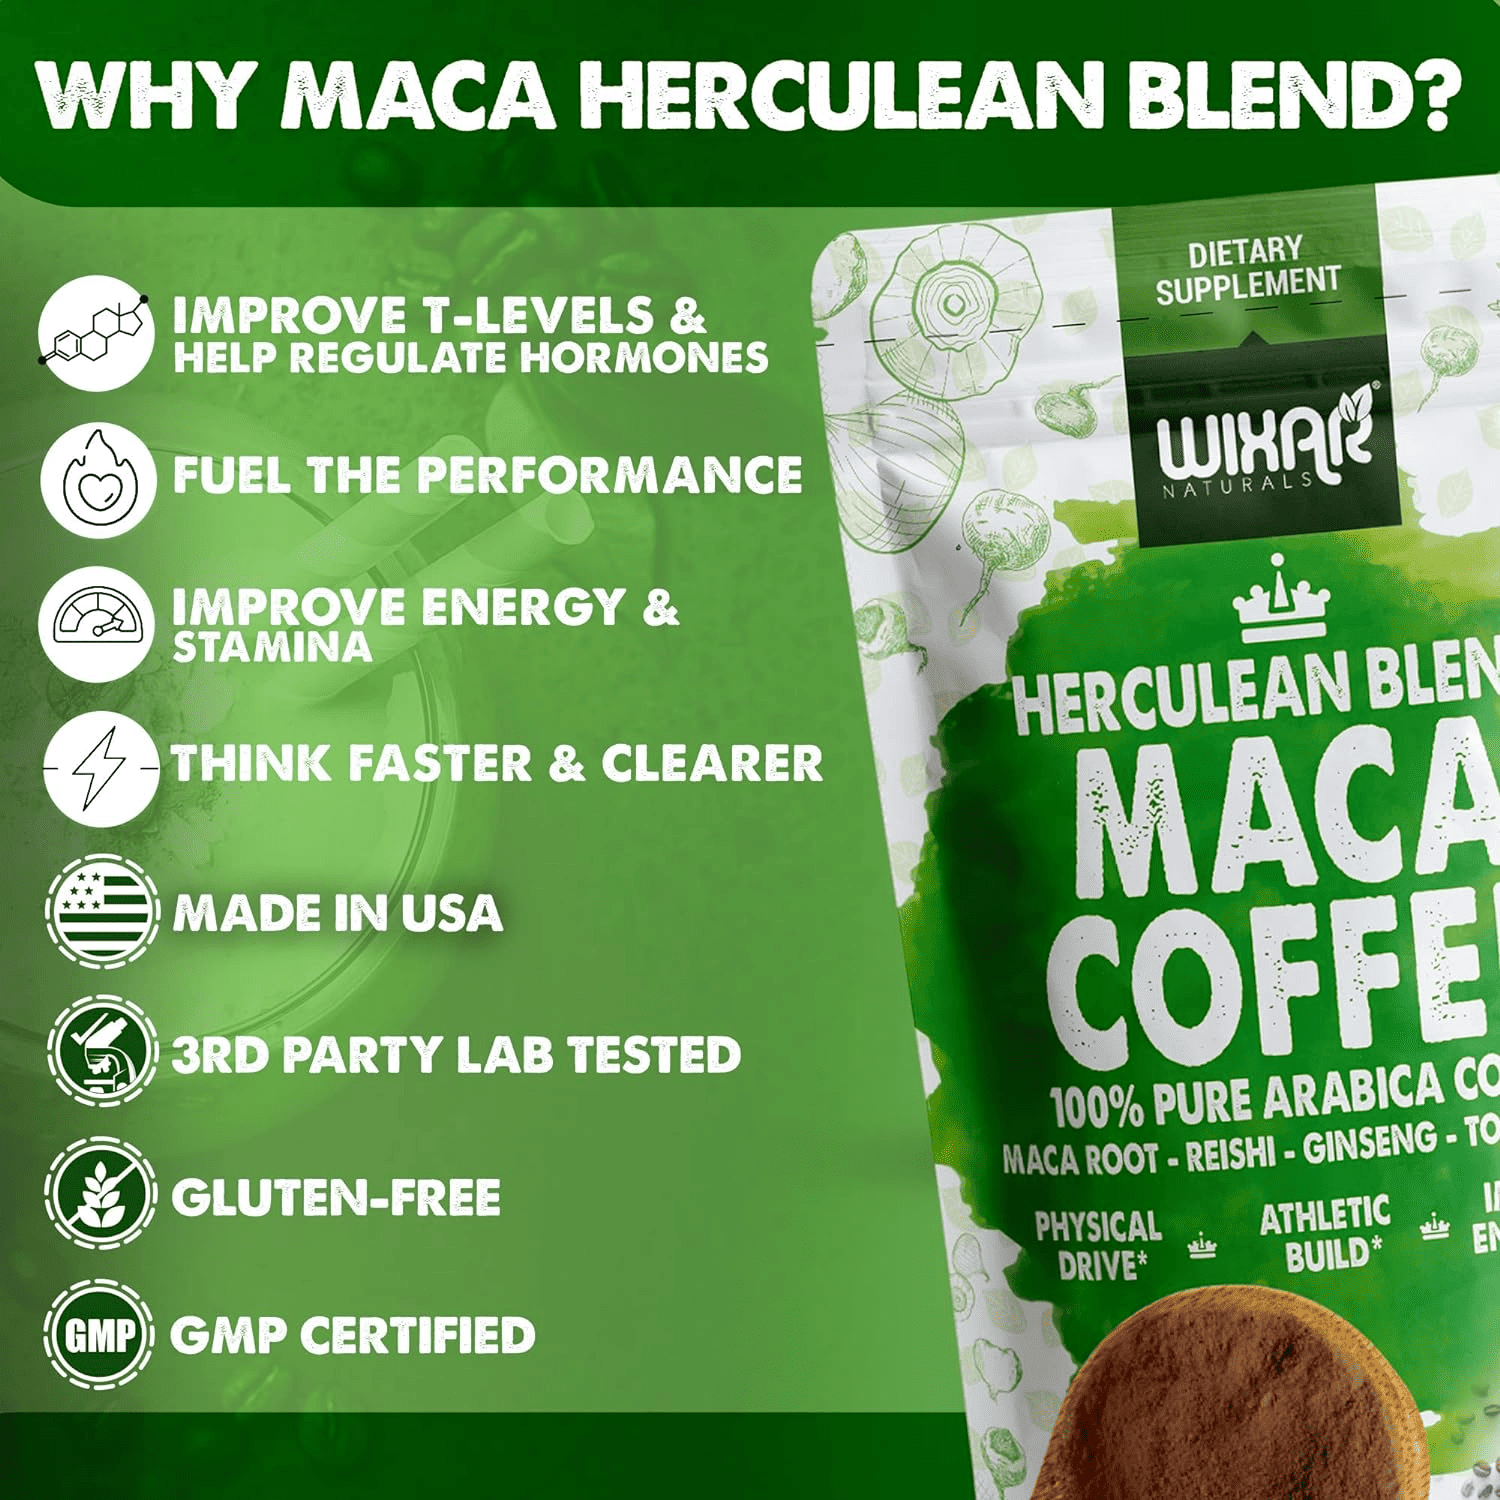 A cup of delicious Maca Coffee, known for its numerous health advantages including increased energy and improved mood, among others.